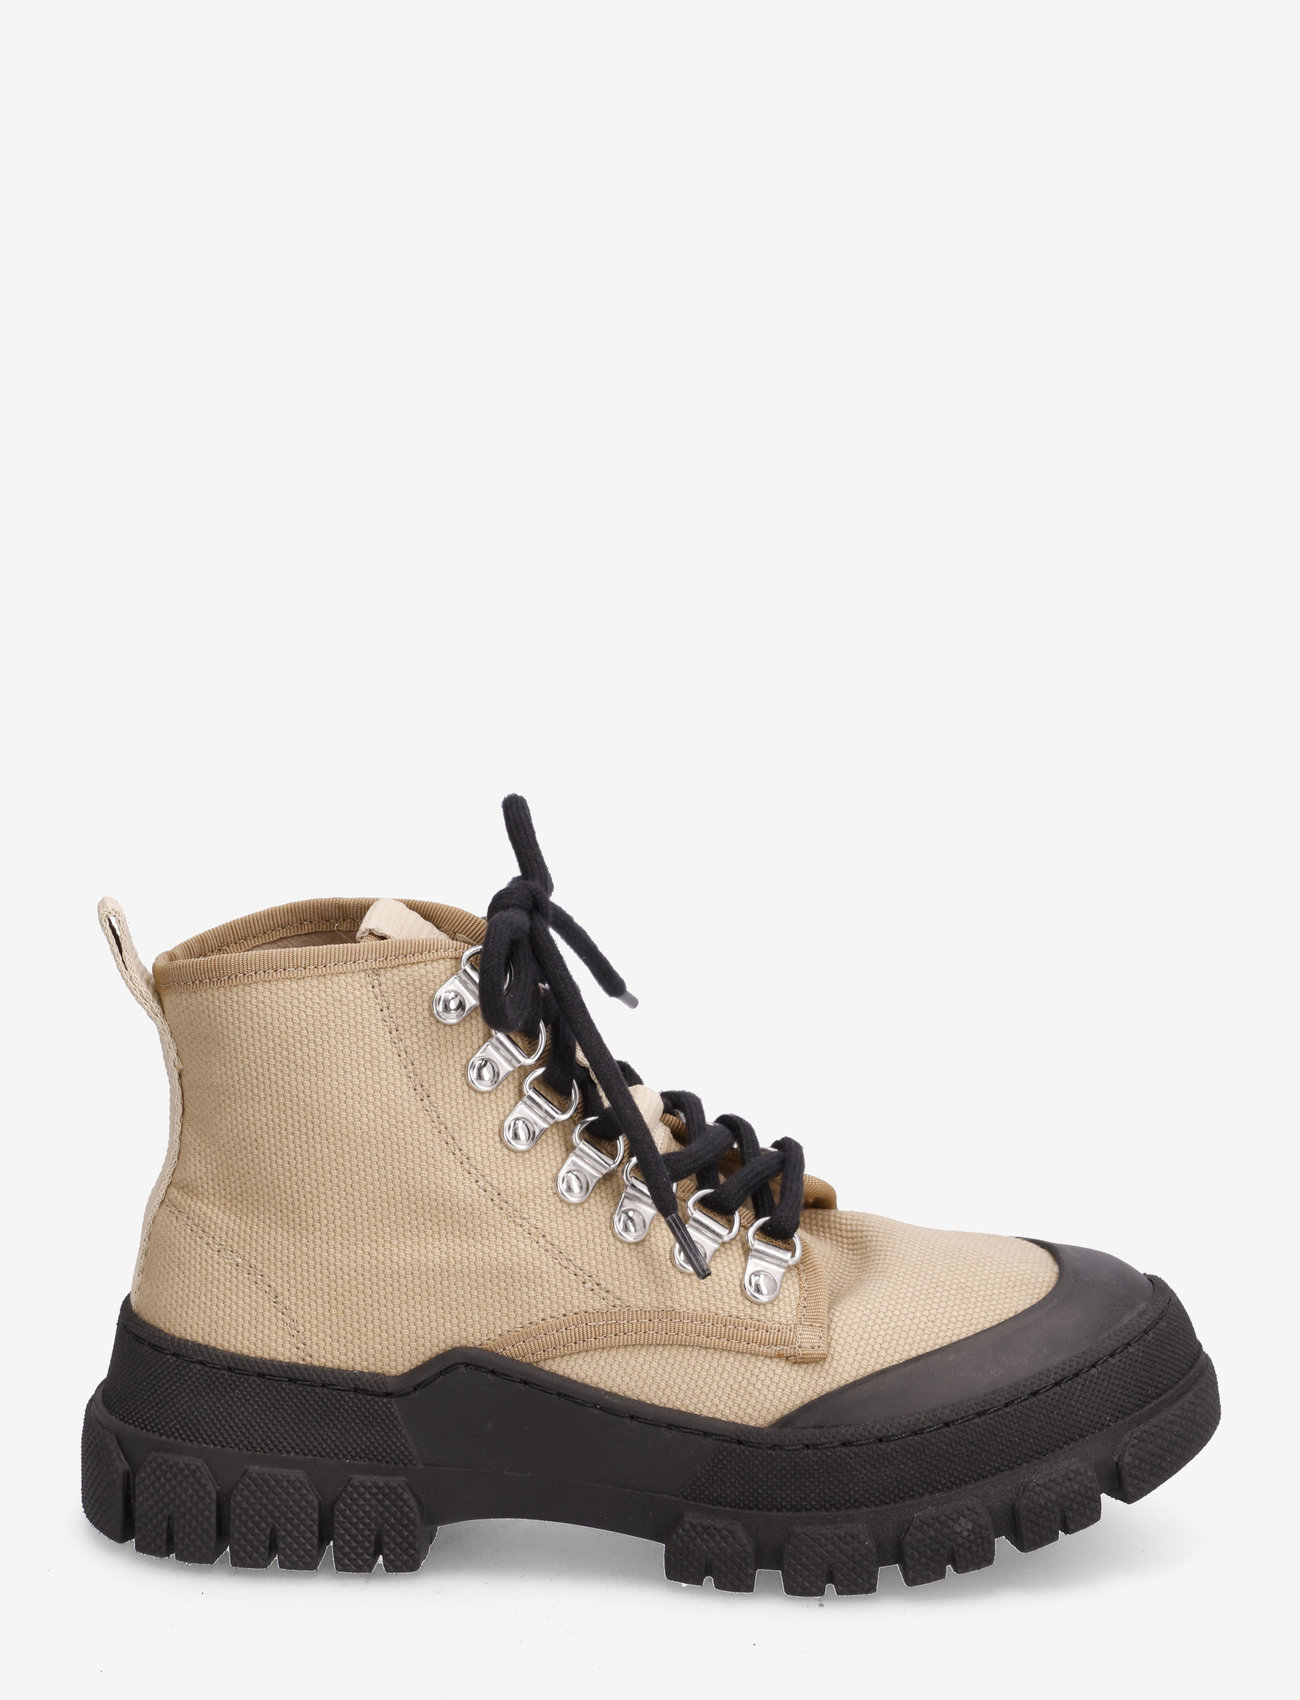 Garment Project - Twig High - Taupe / Black - laced boots - taupe - 1